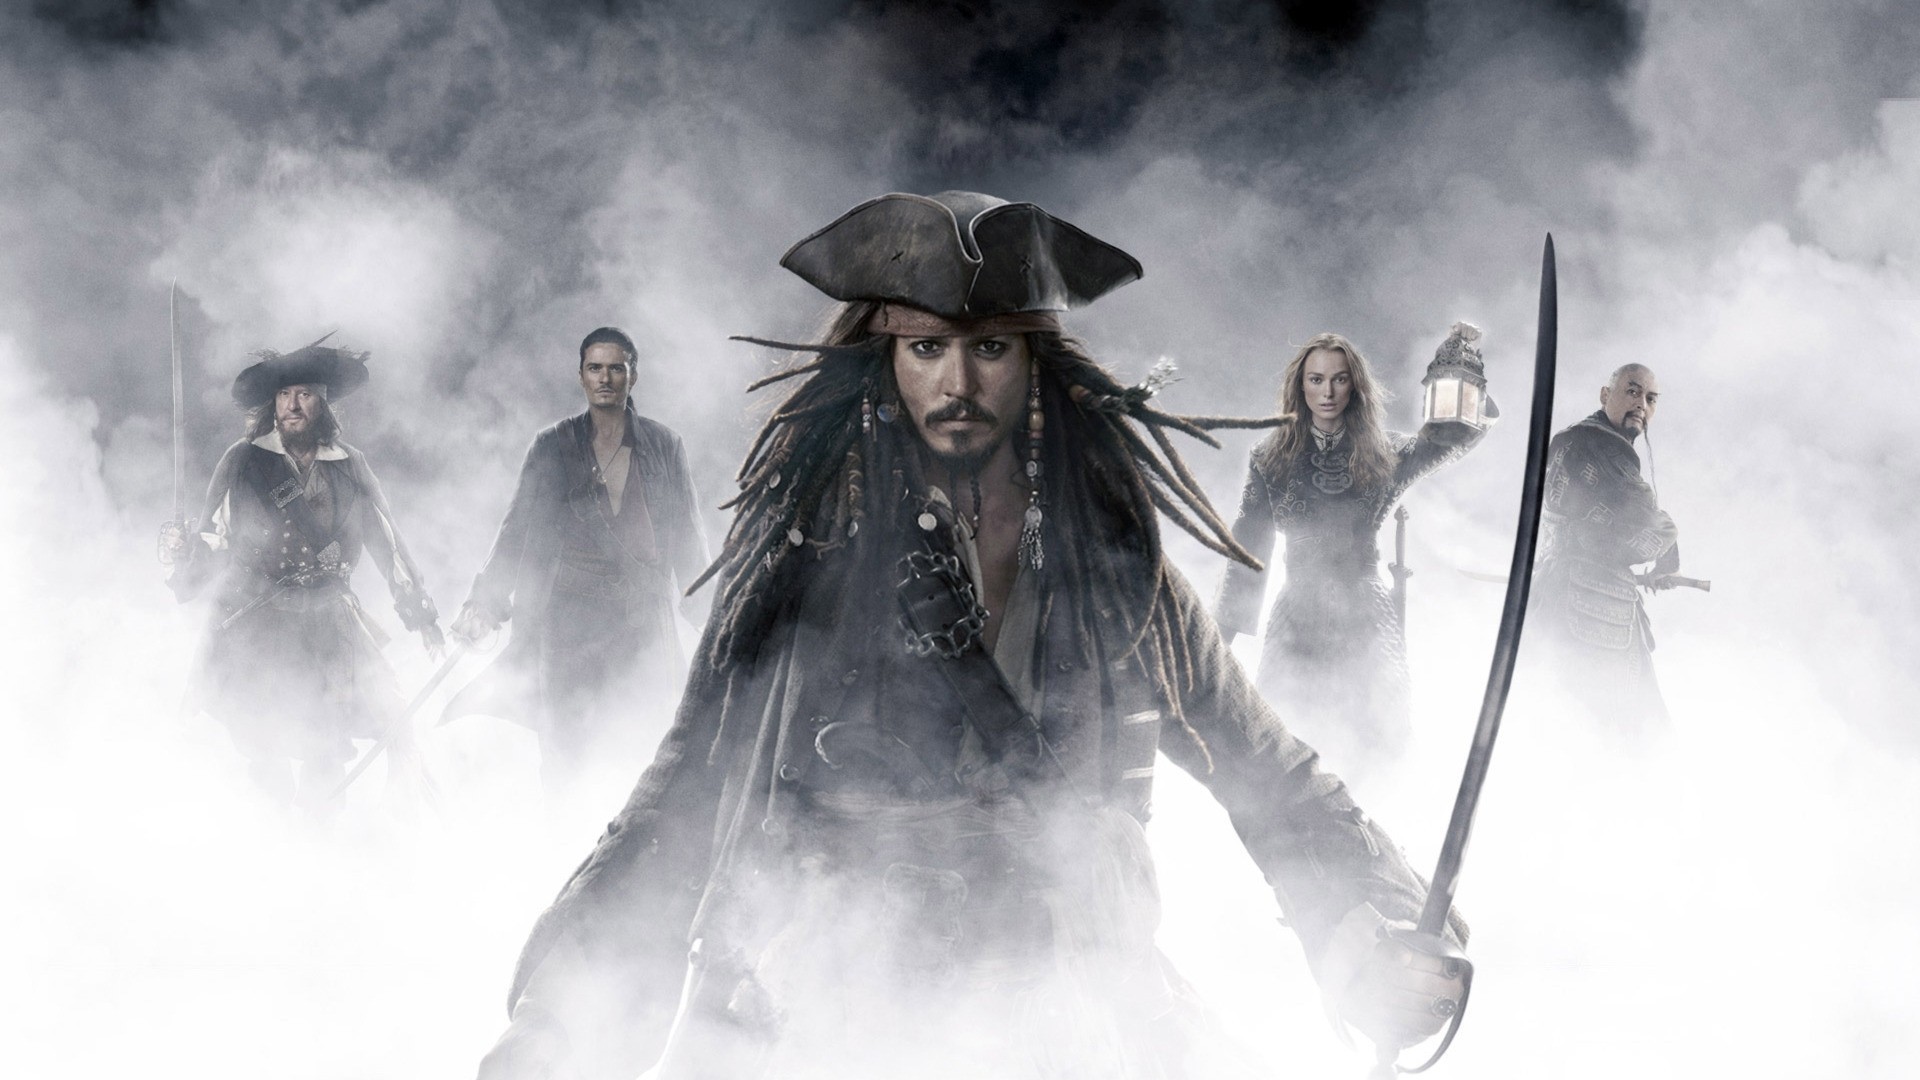 1920x1080 Title : pirates of the caribbean movie wallpapers | hd wallpapers | id  #10939. Dimension : 1920 x 1080. File Type : JPG/JPEG